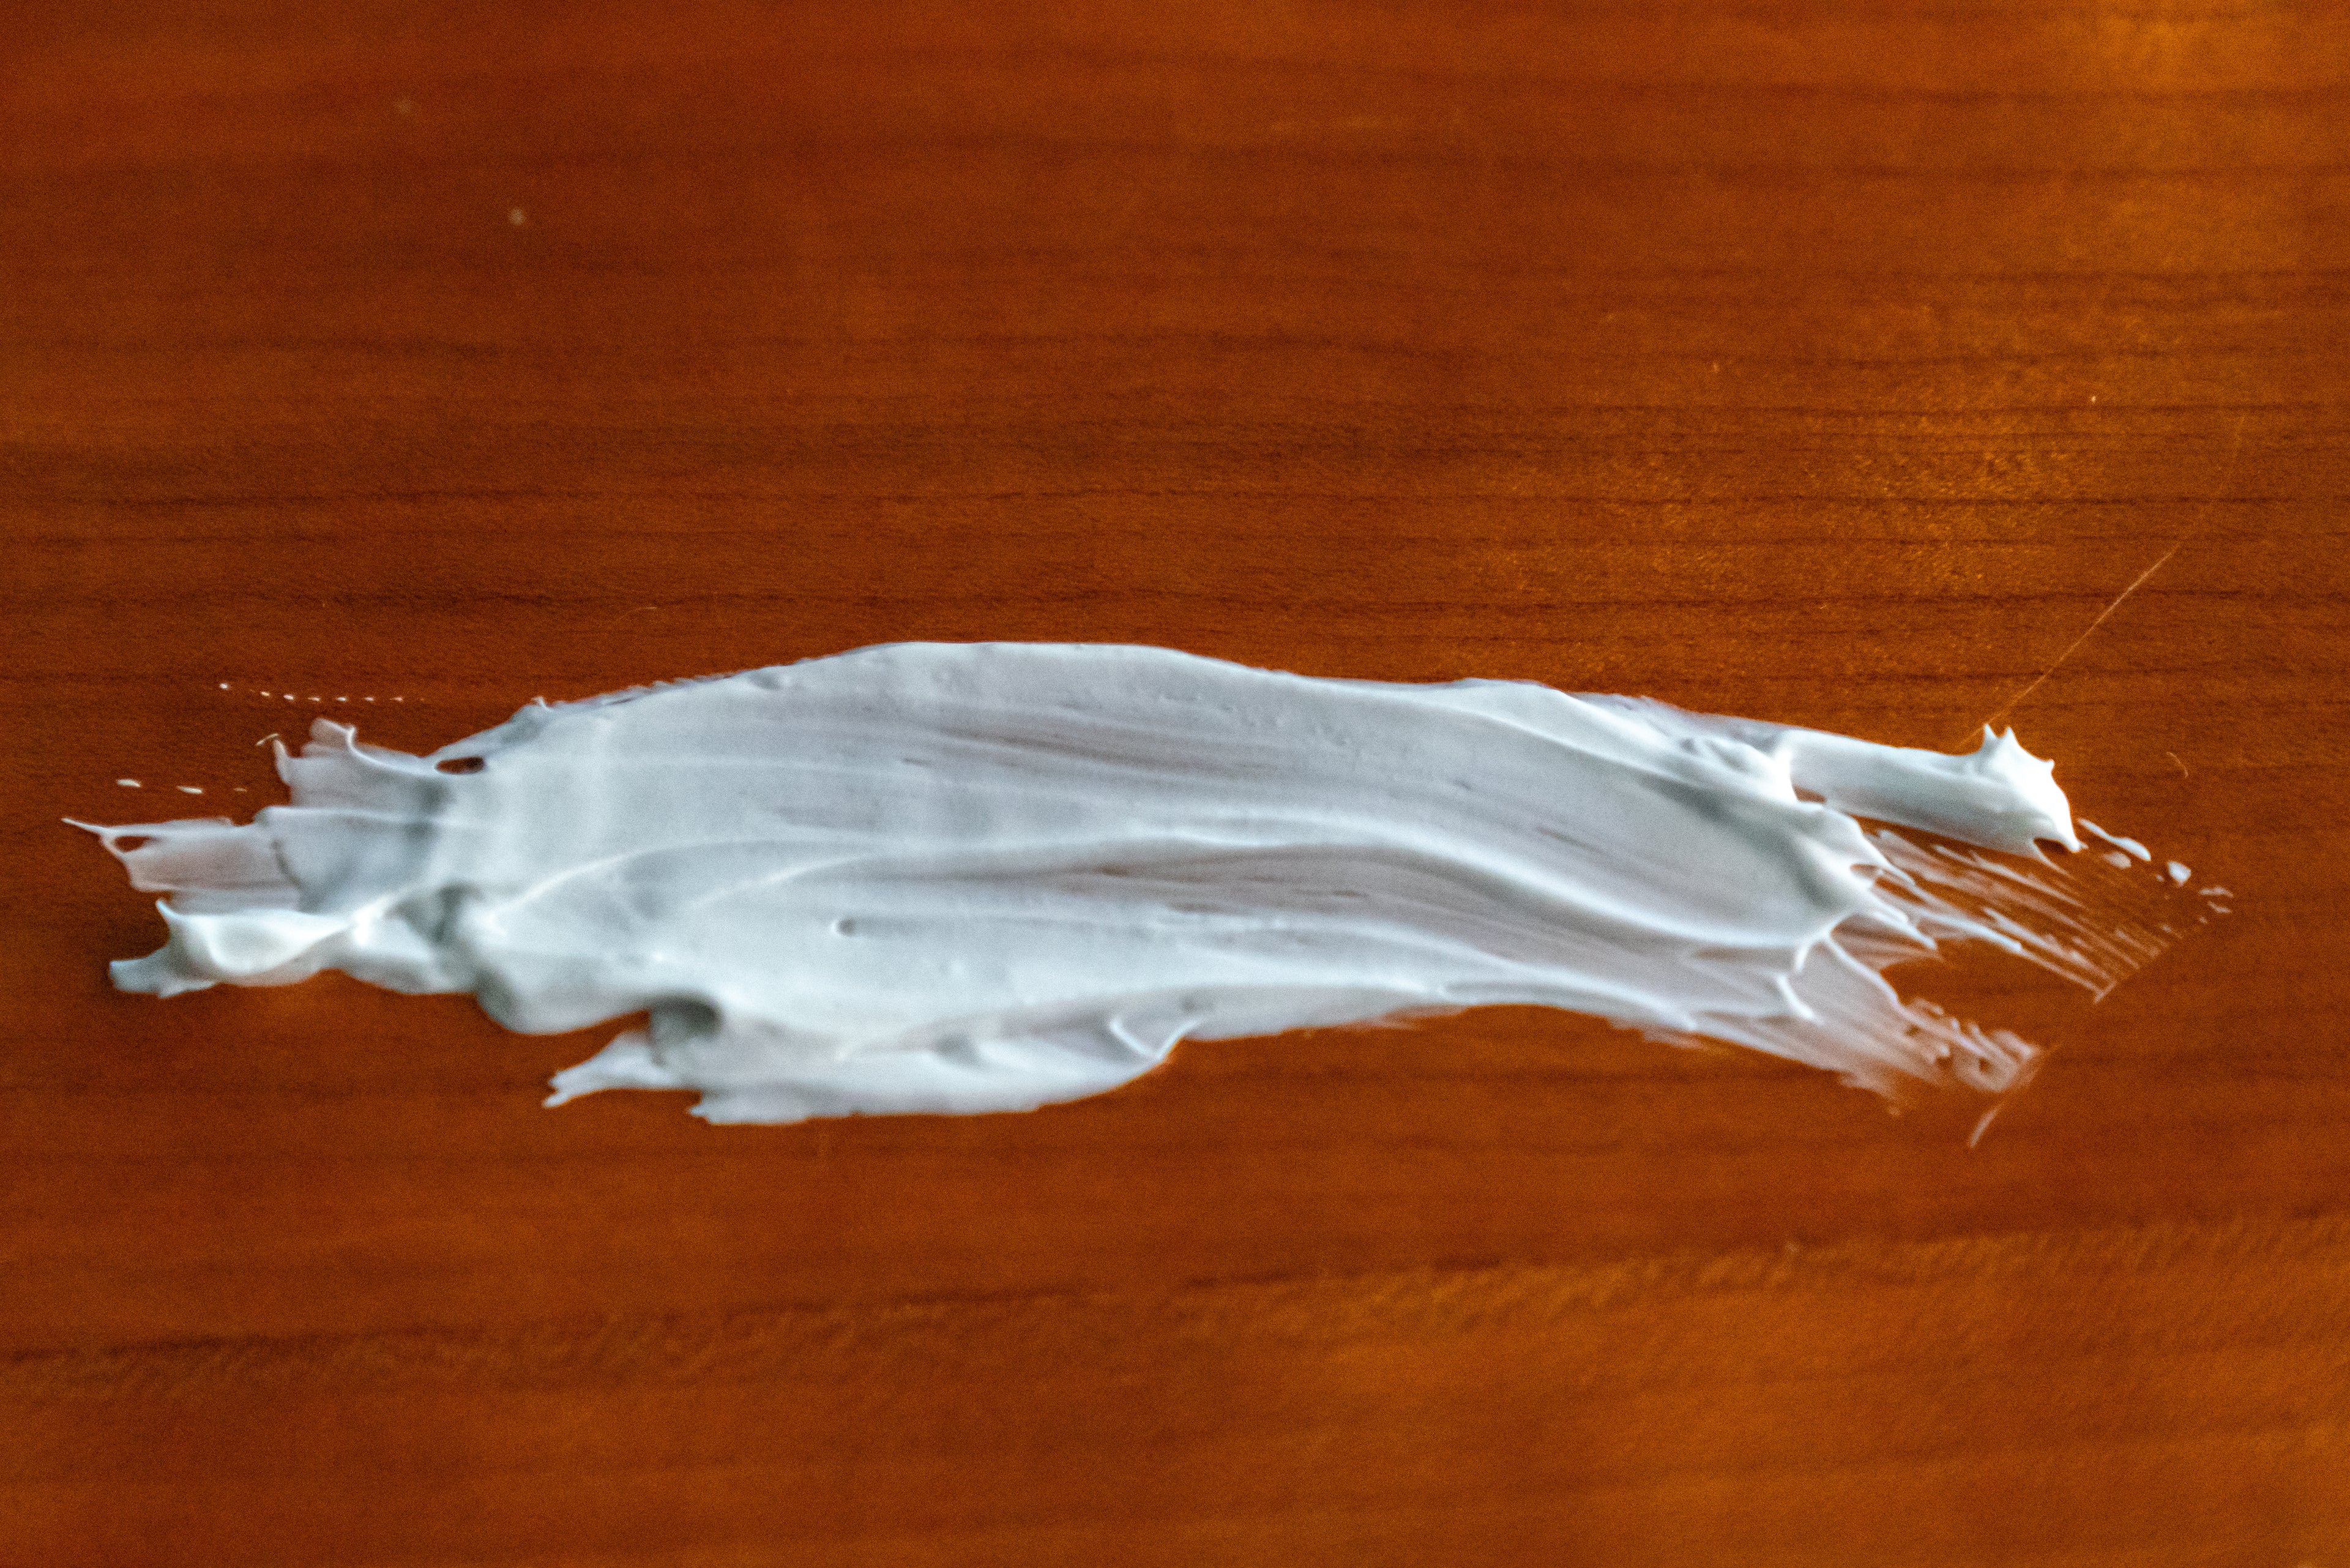 A picture of Naturallow's tallow moisturizer smeared across a woodgrain background